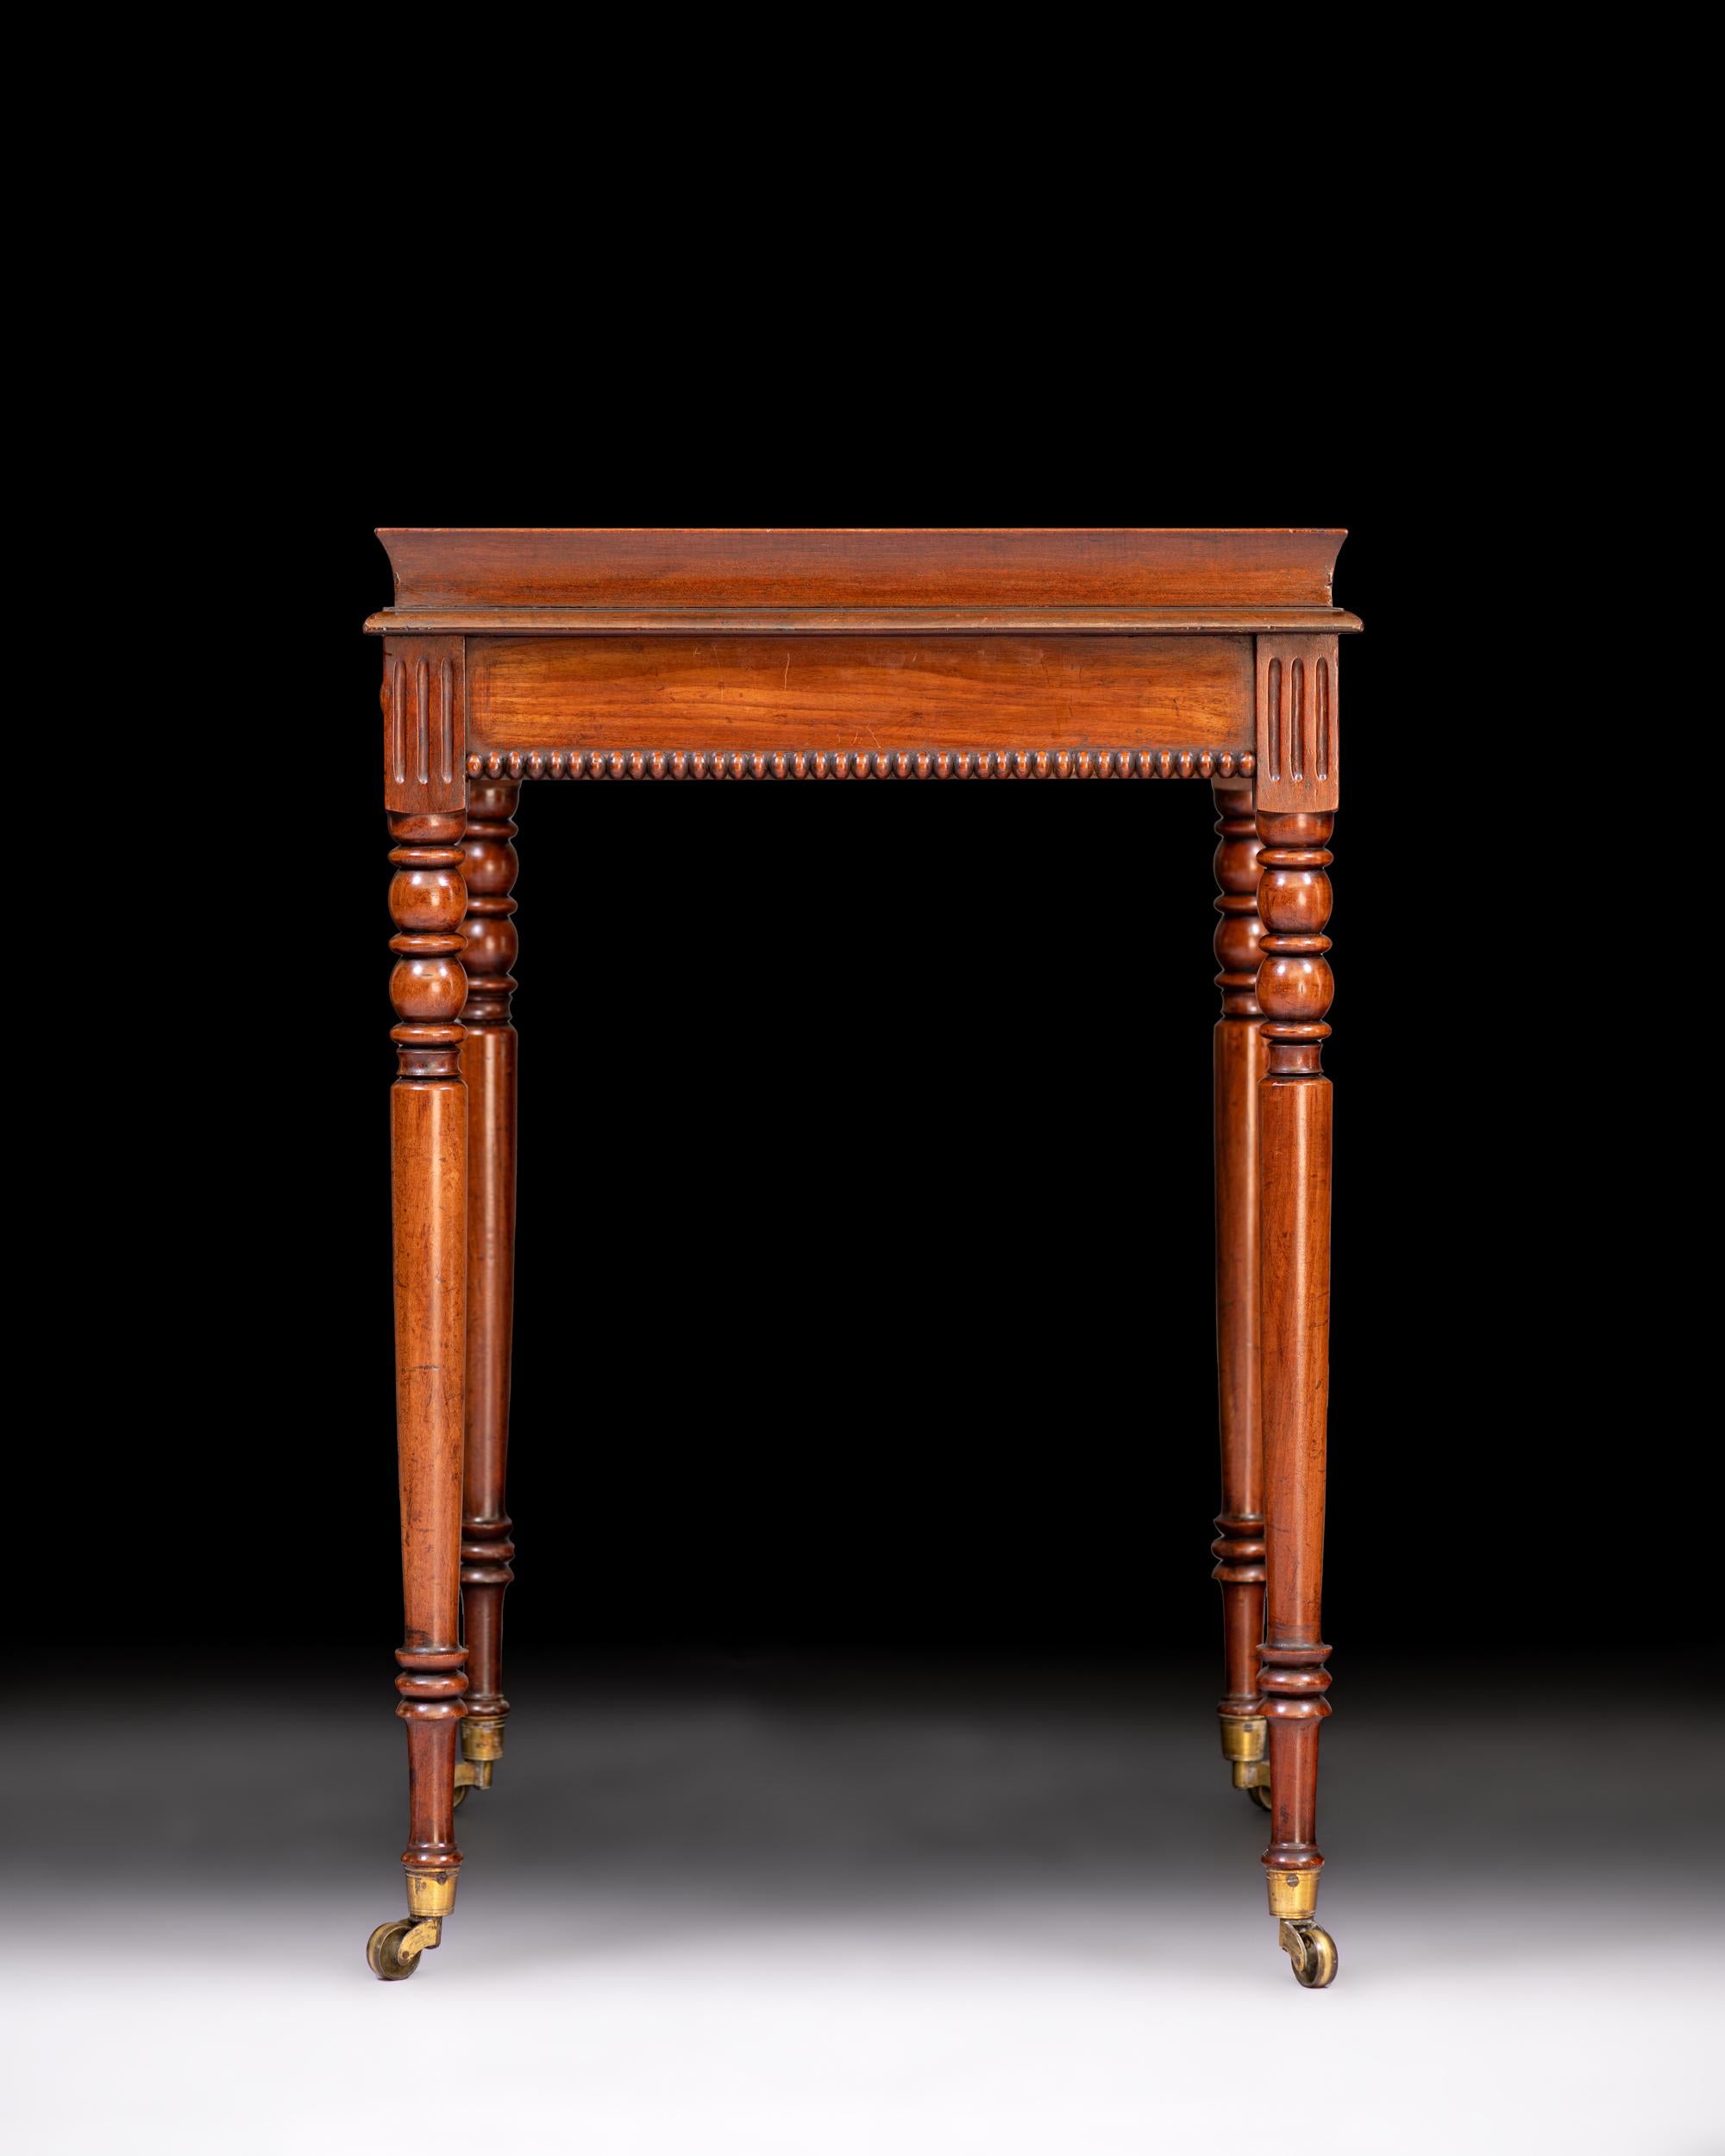 Early 19th Century English Regency Side Table Attributed to Gillows of Lancaster For Sale 2